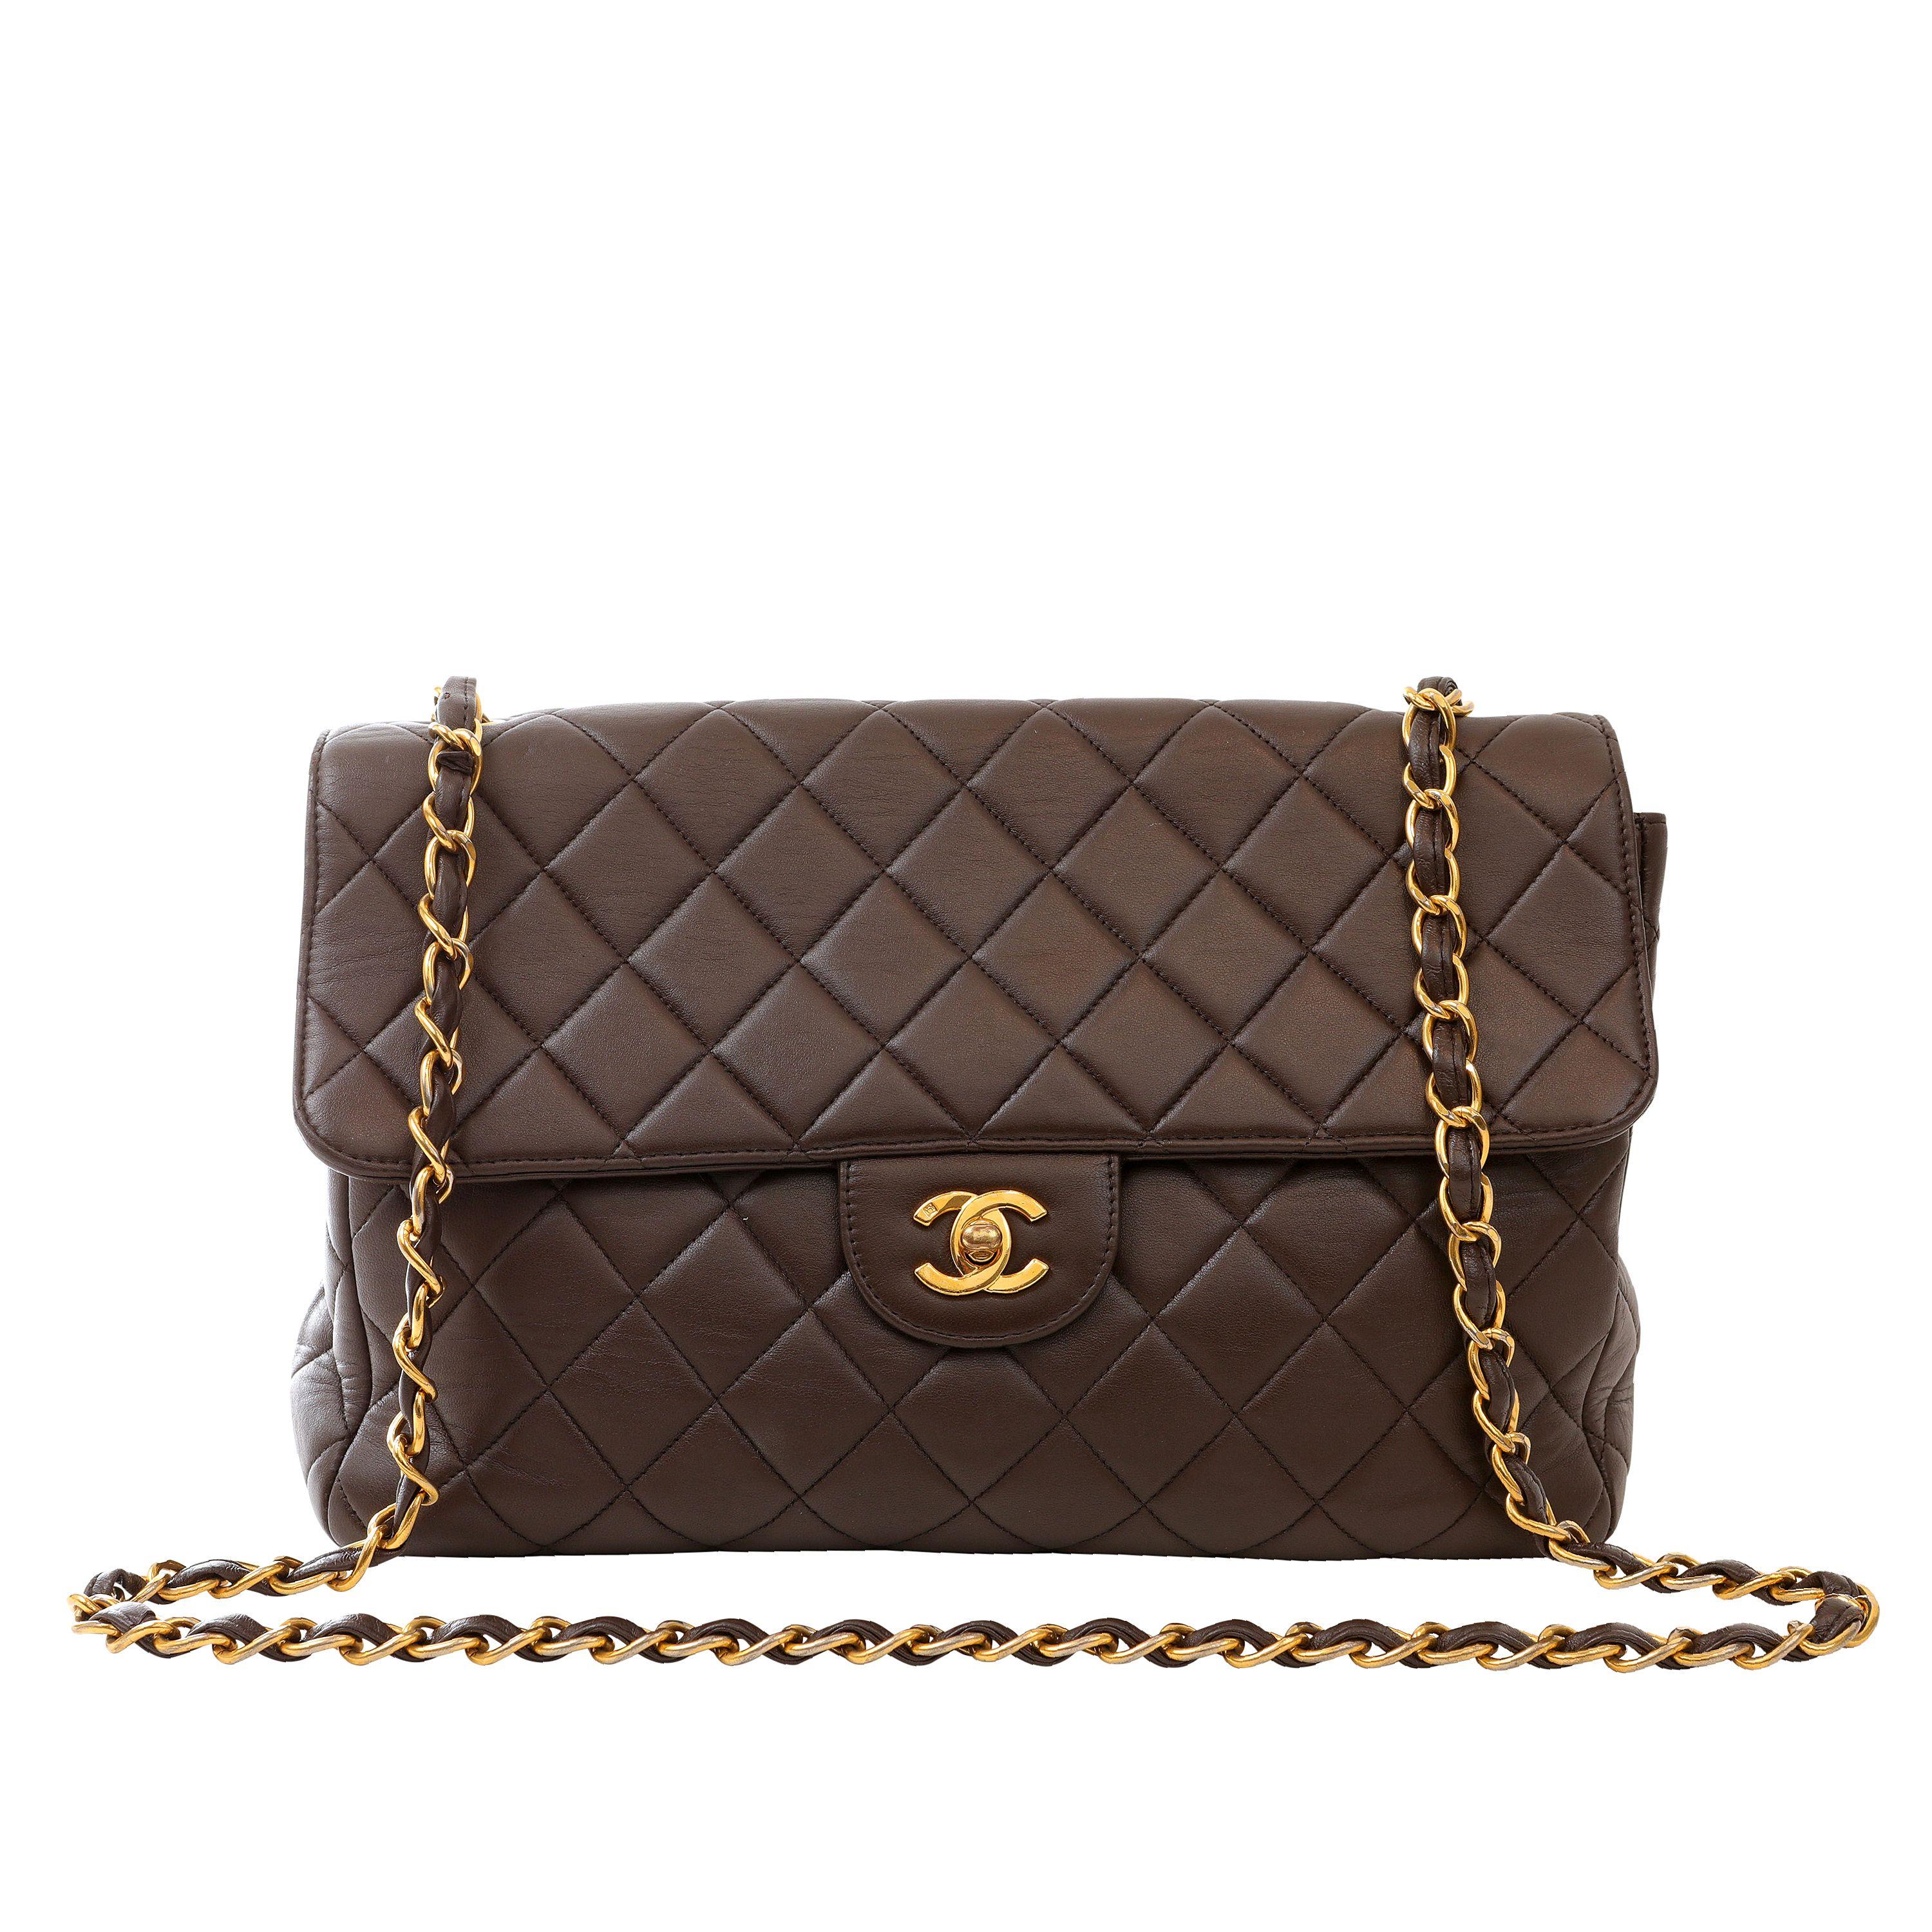 Women's Chanel Vintage Chocolate Brown Lambskin Jumbo Classic with Gold Hardware